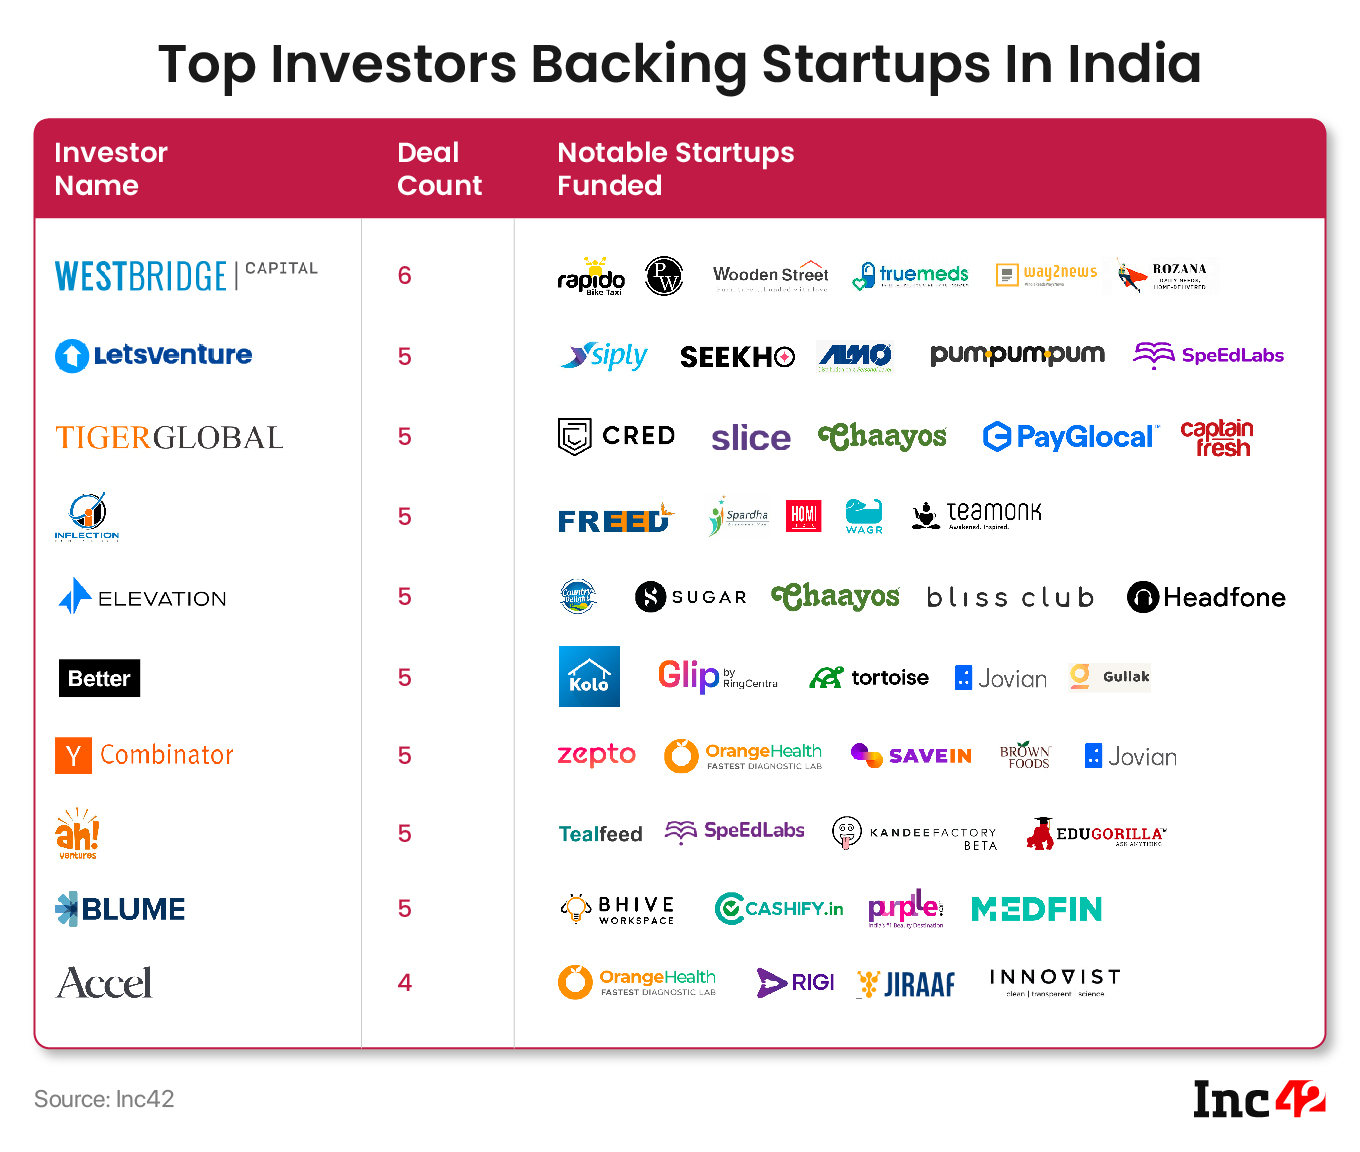 Here's The List Of Most Active Investors For Indian Consumer Internet Startups